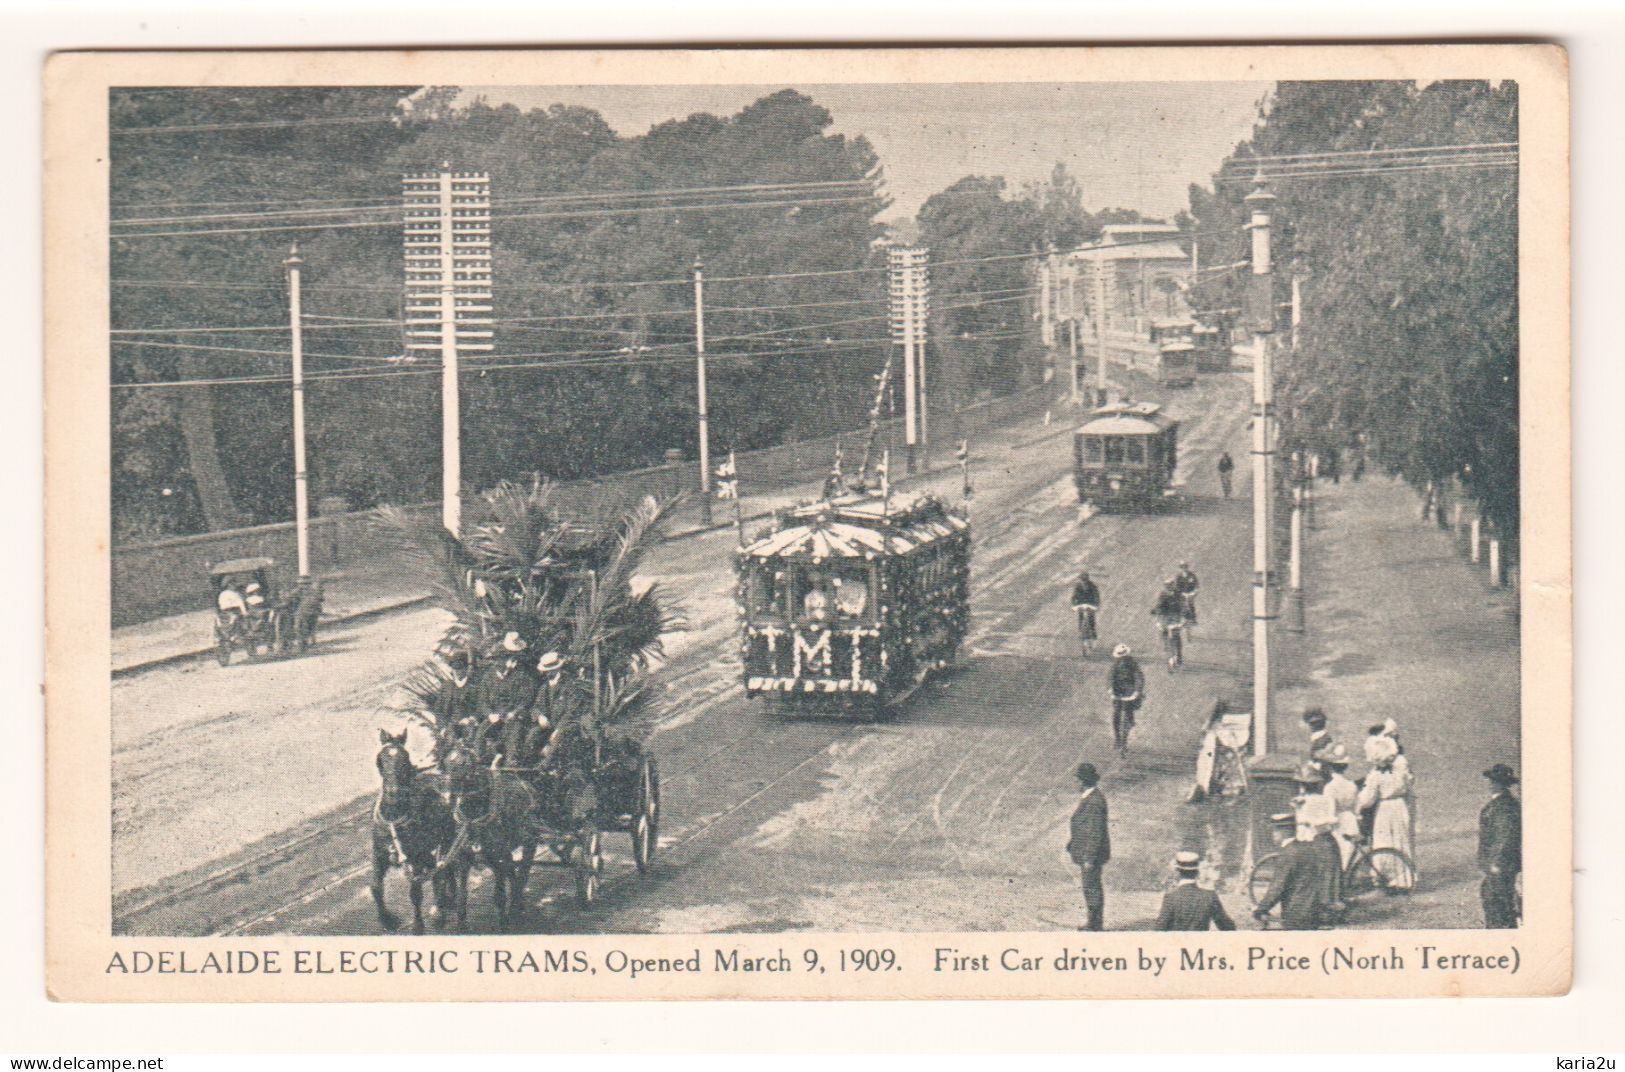 Adelaide's First Electric Trams, 1909, South Australia, Old Postcard - Adelaide